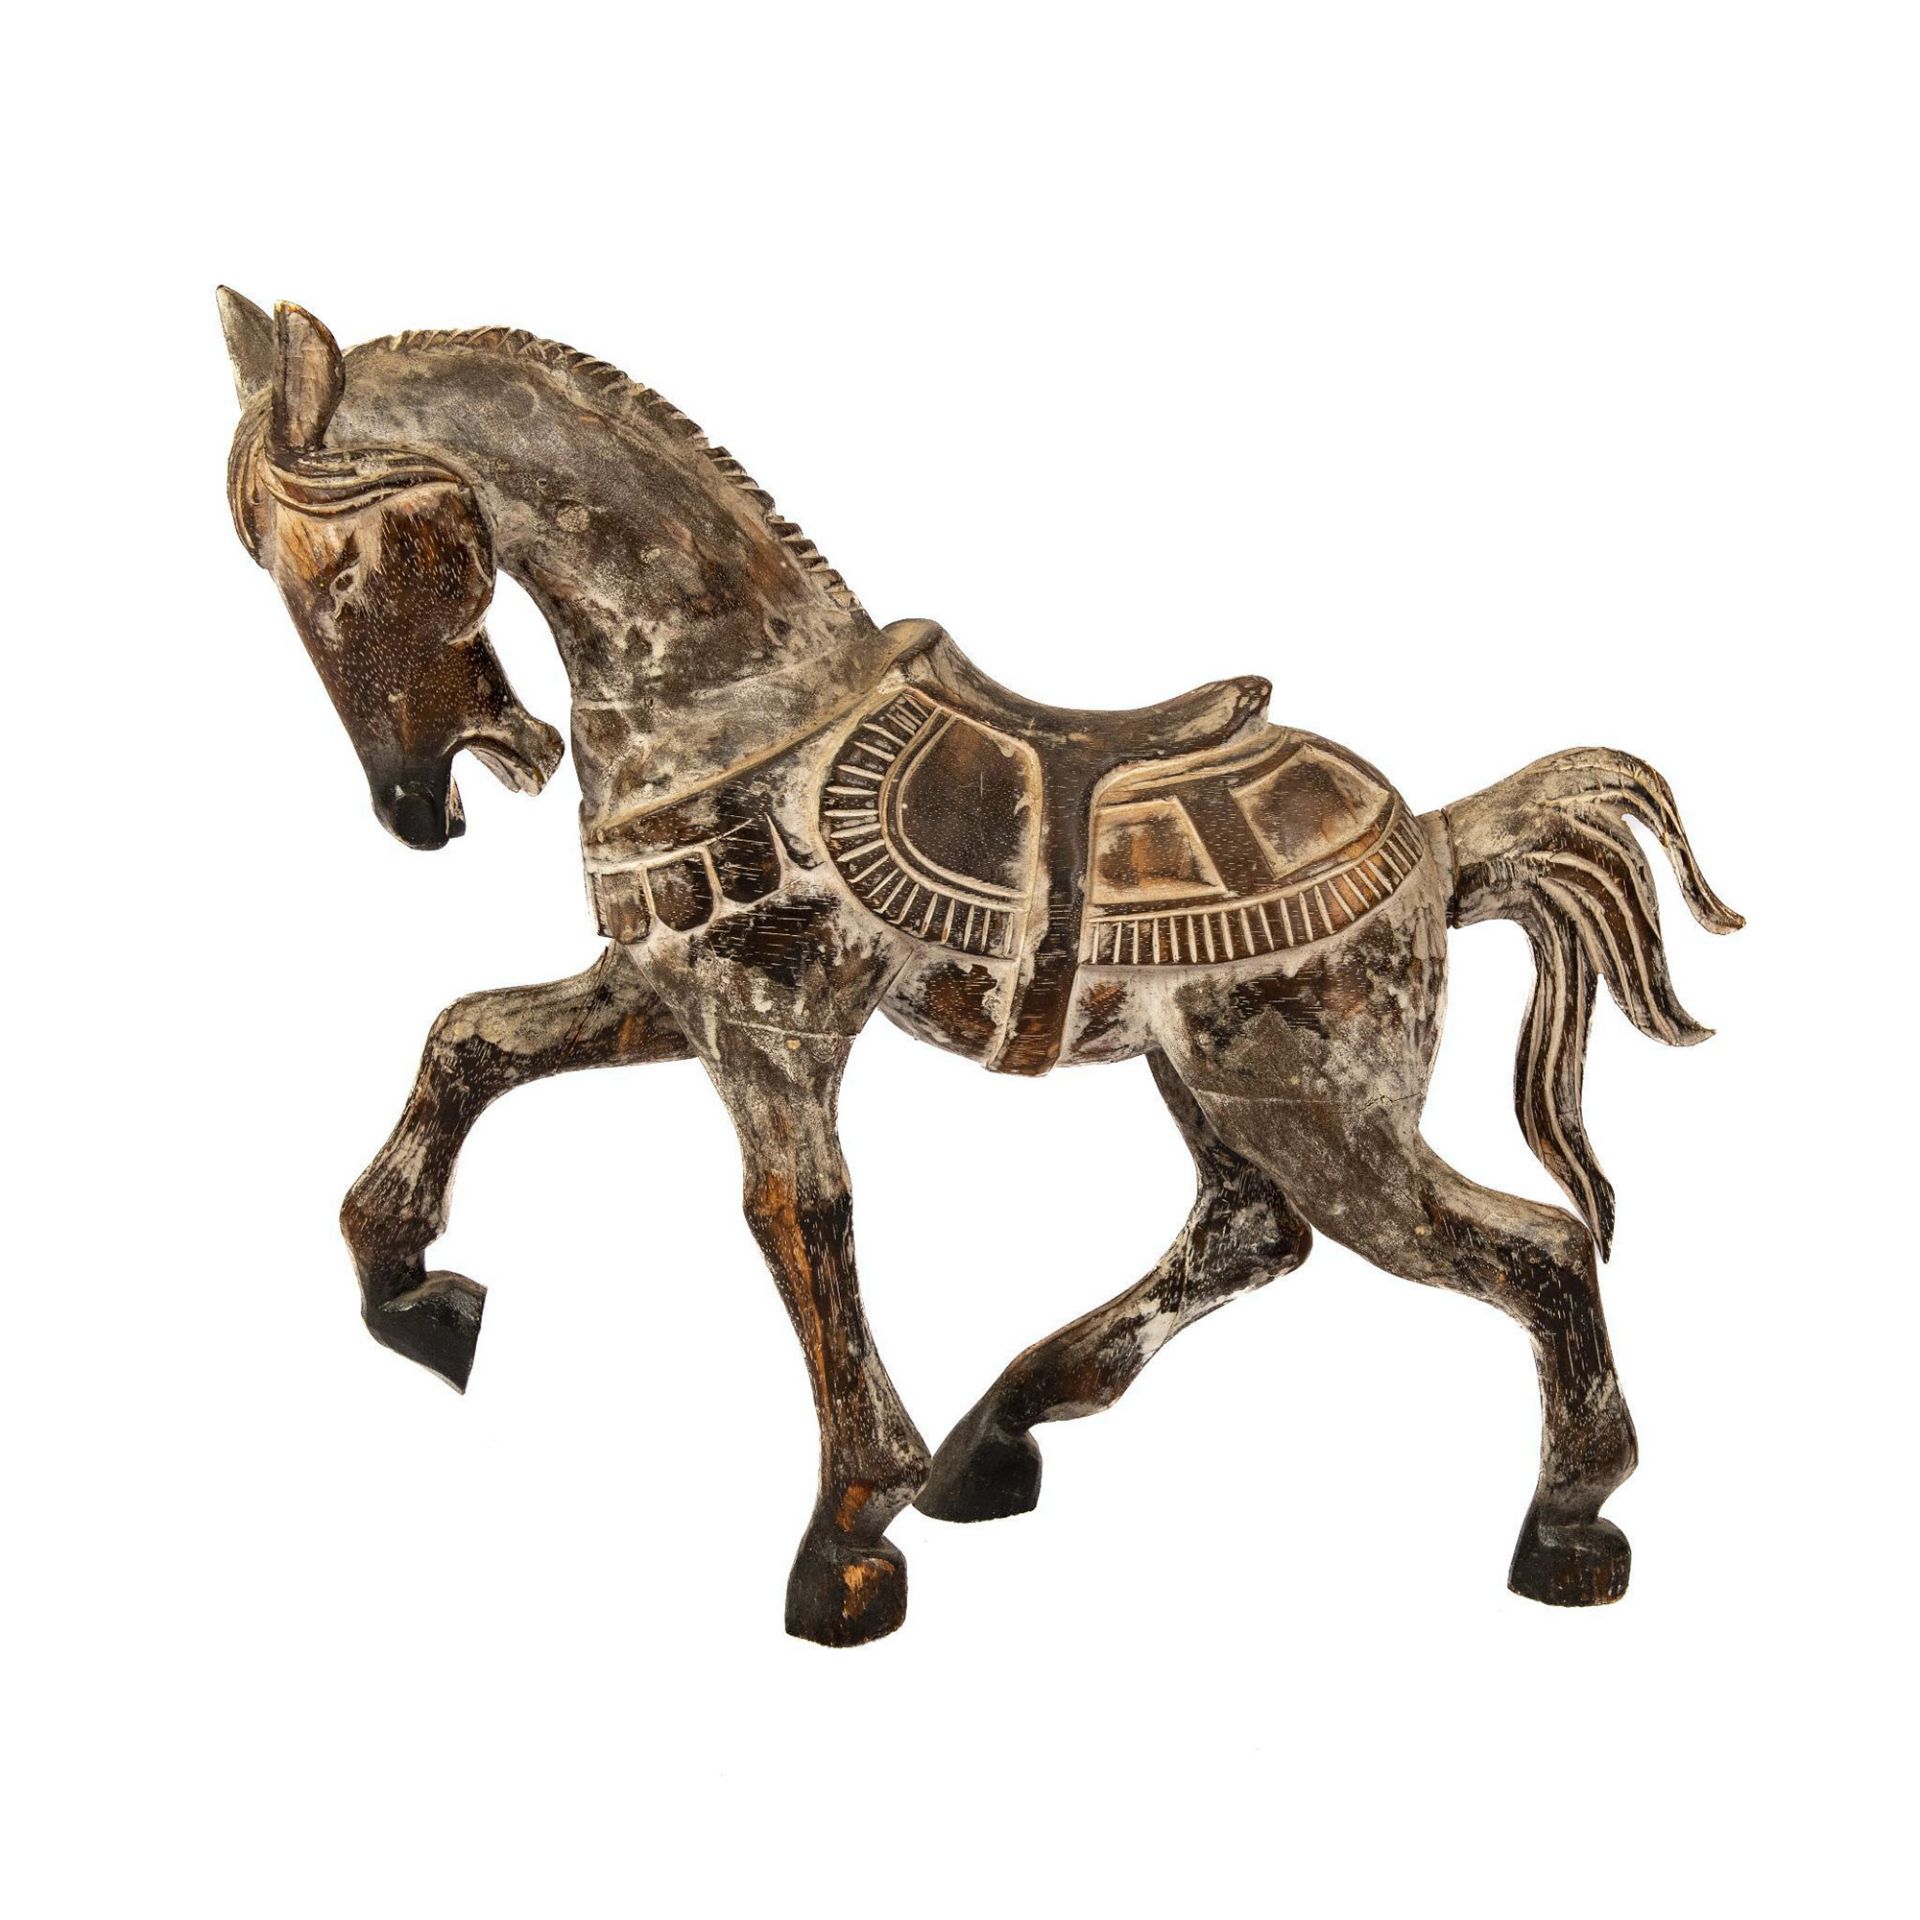 Vintage Hand Carved Wood Carousel Style Horse Monochromatic - Image 2 of 4